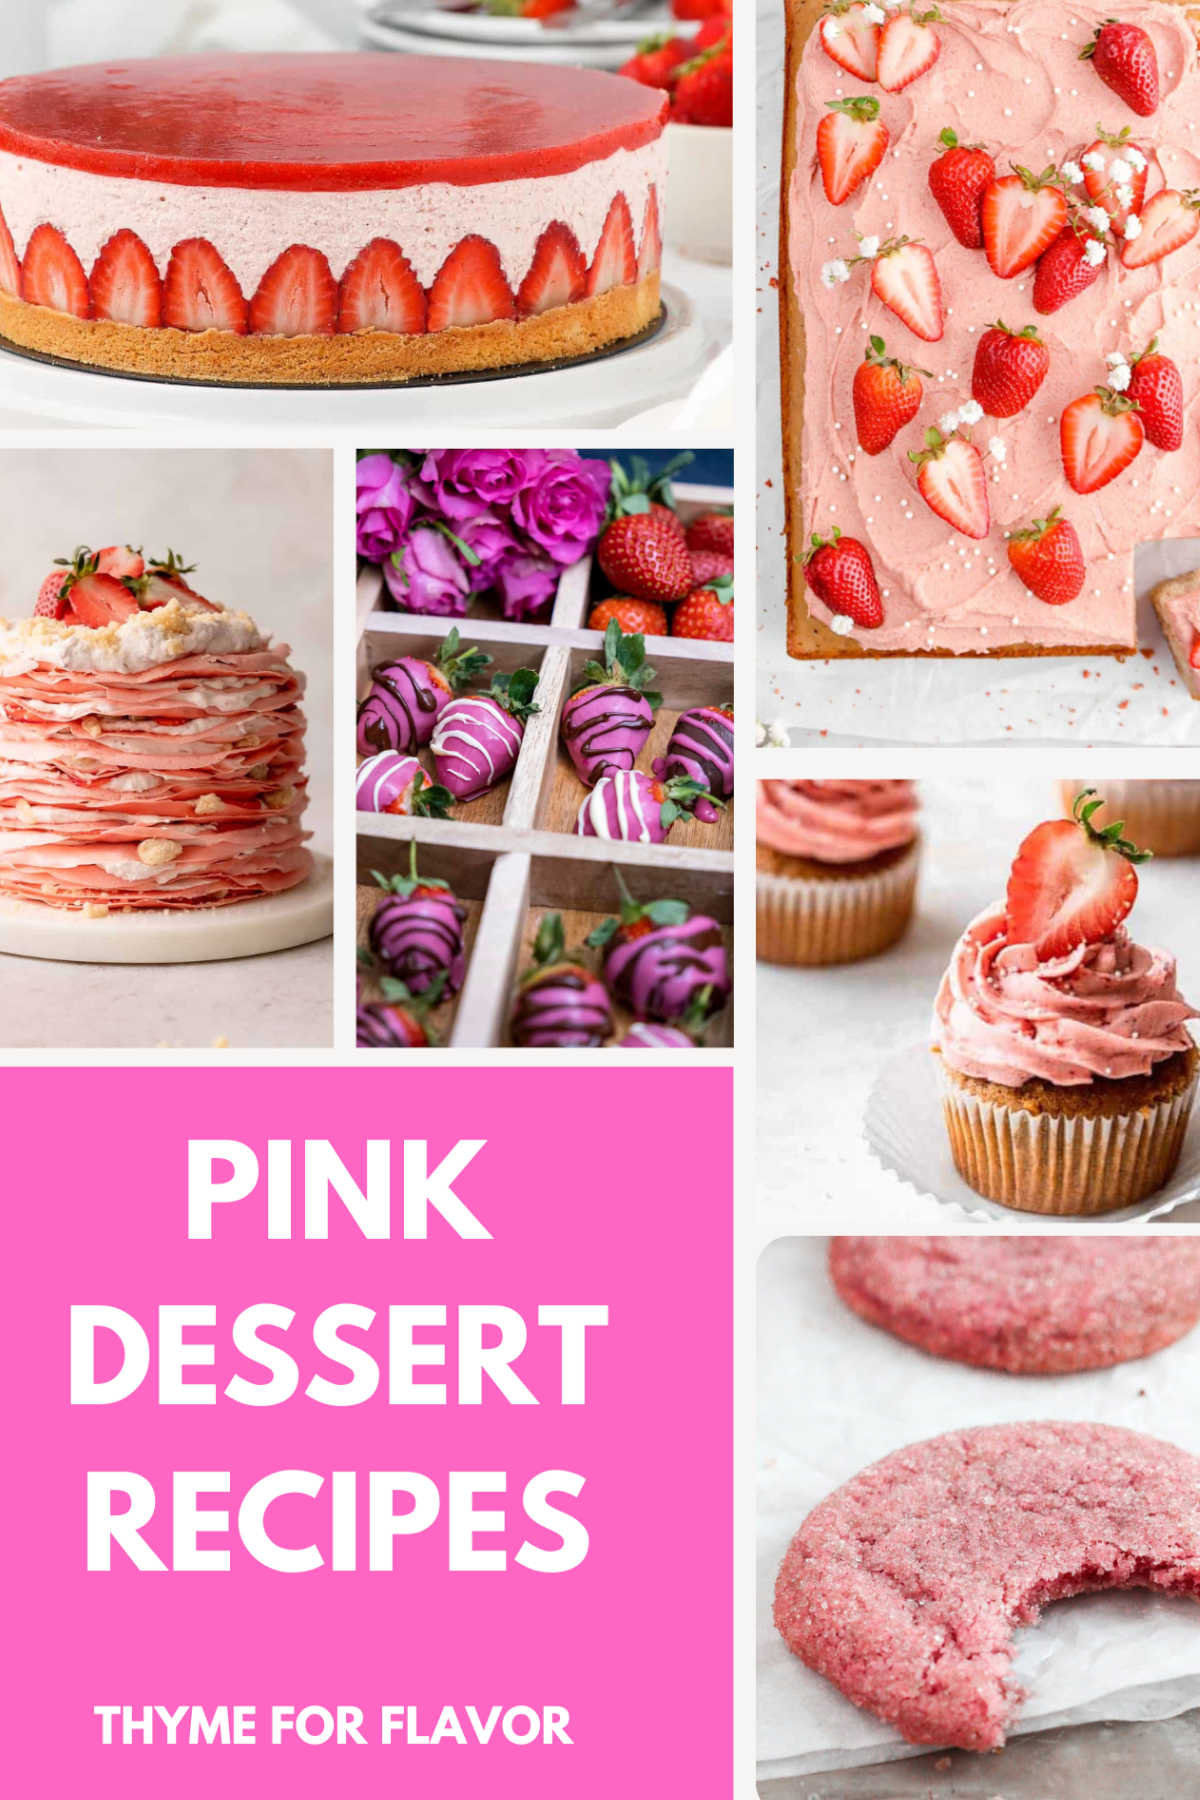 Collection of images of pink desserts.